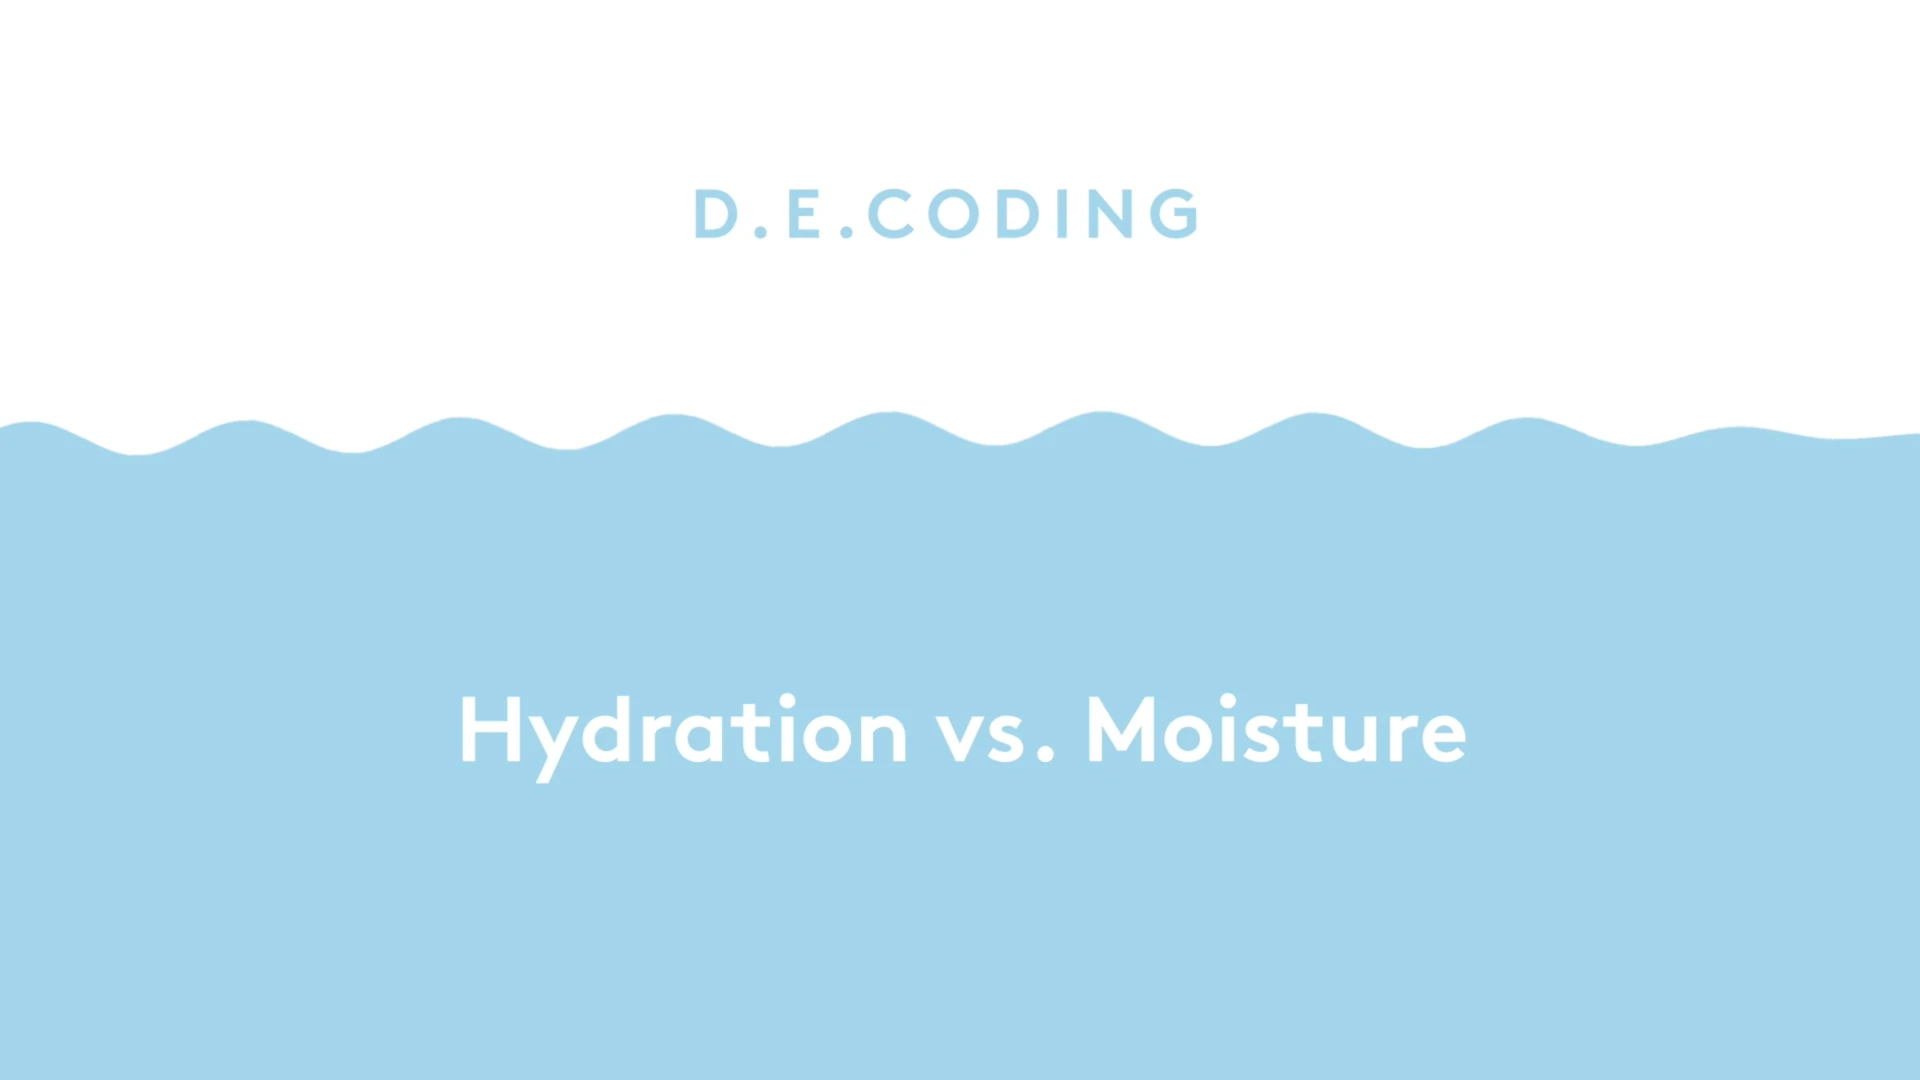 video describing the difference between Hydration and Moisture in the skin